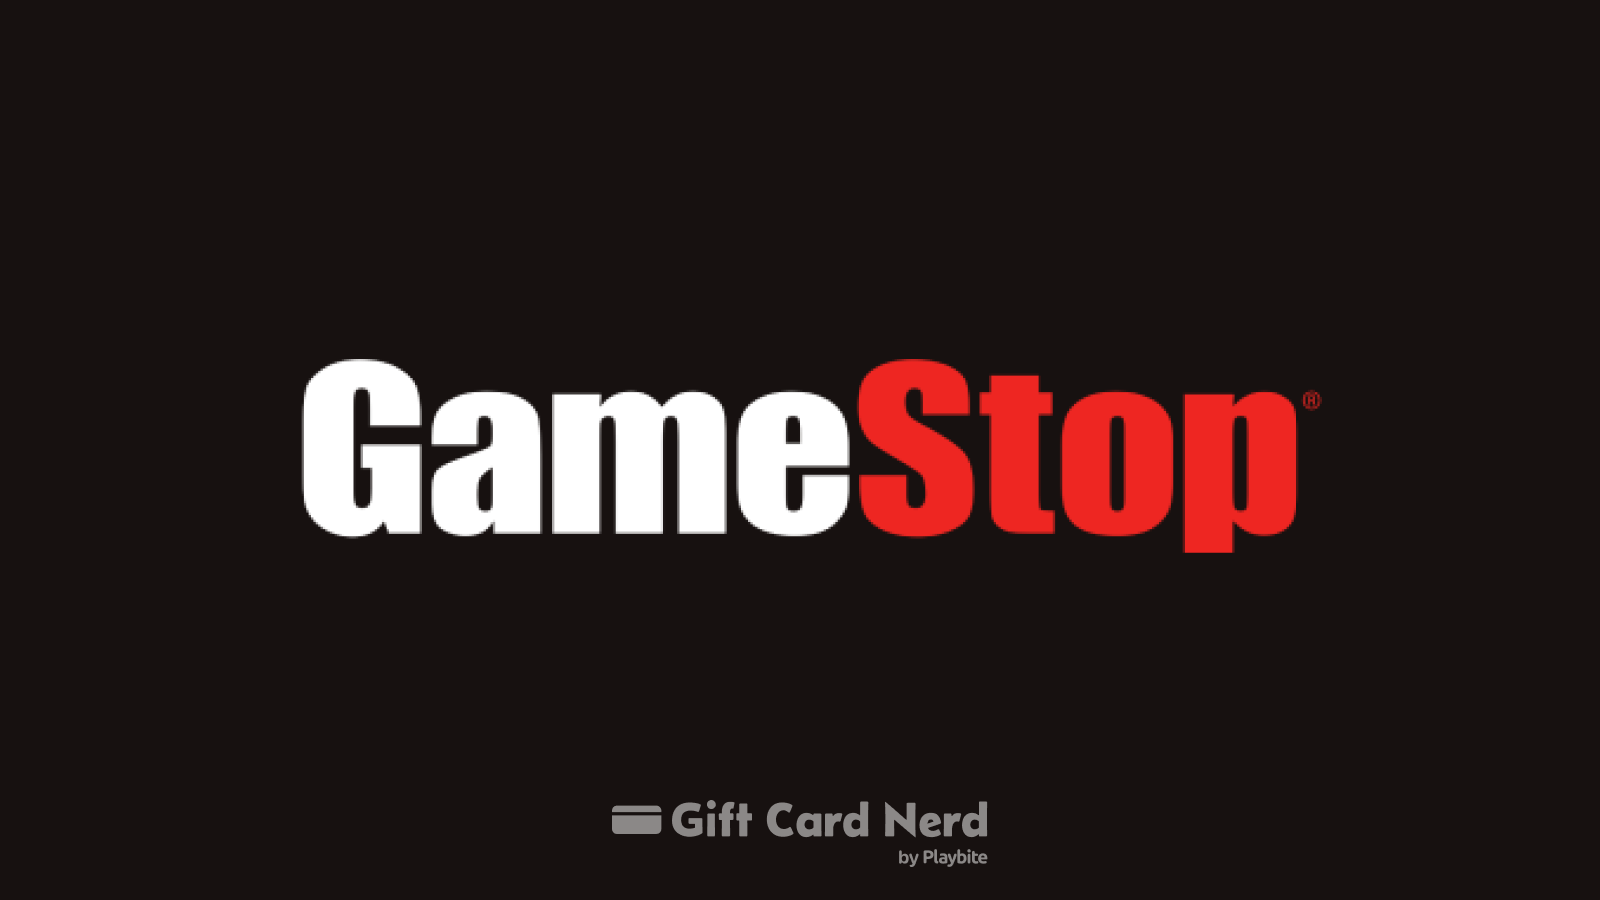 Can I Use a Game Stop Gift Card on Apple Wallet?